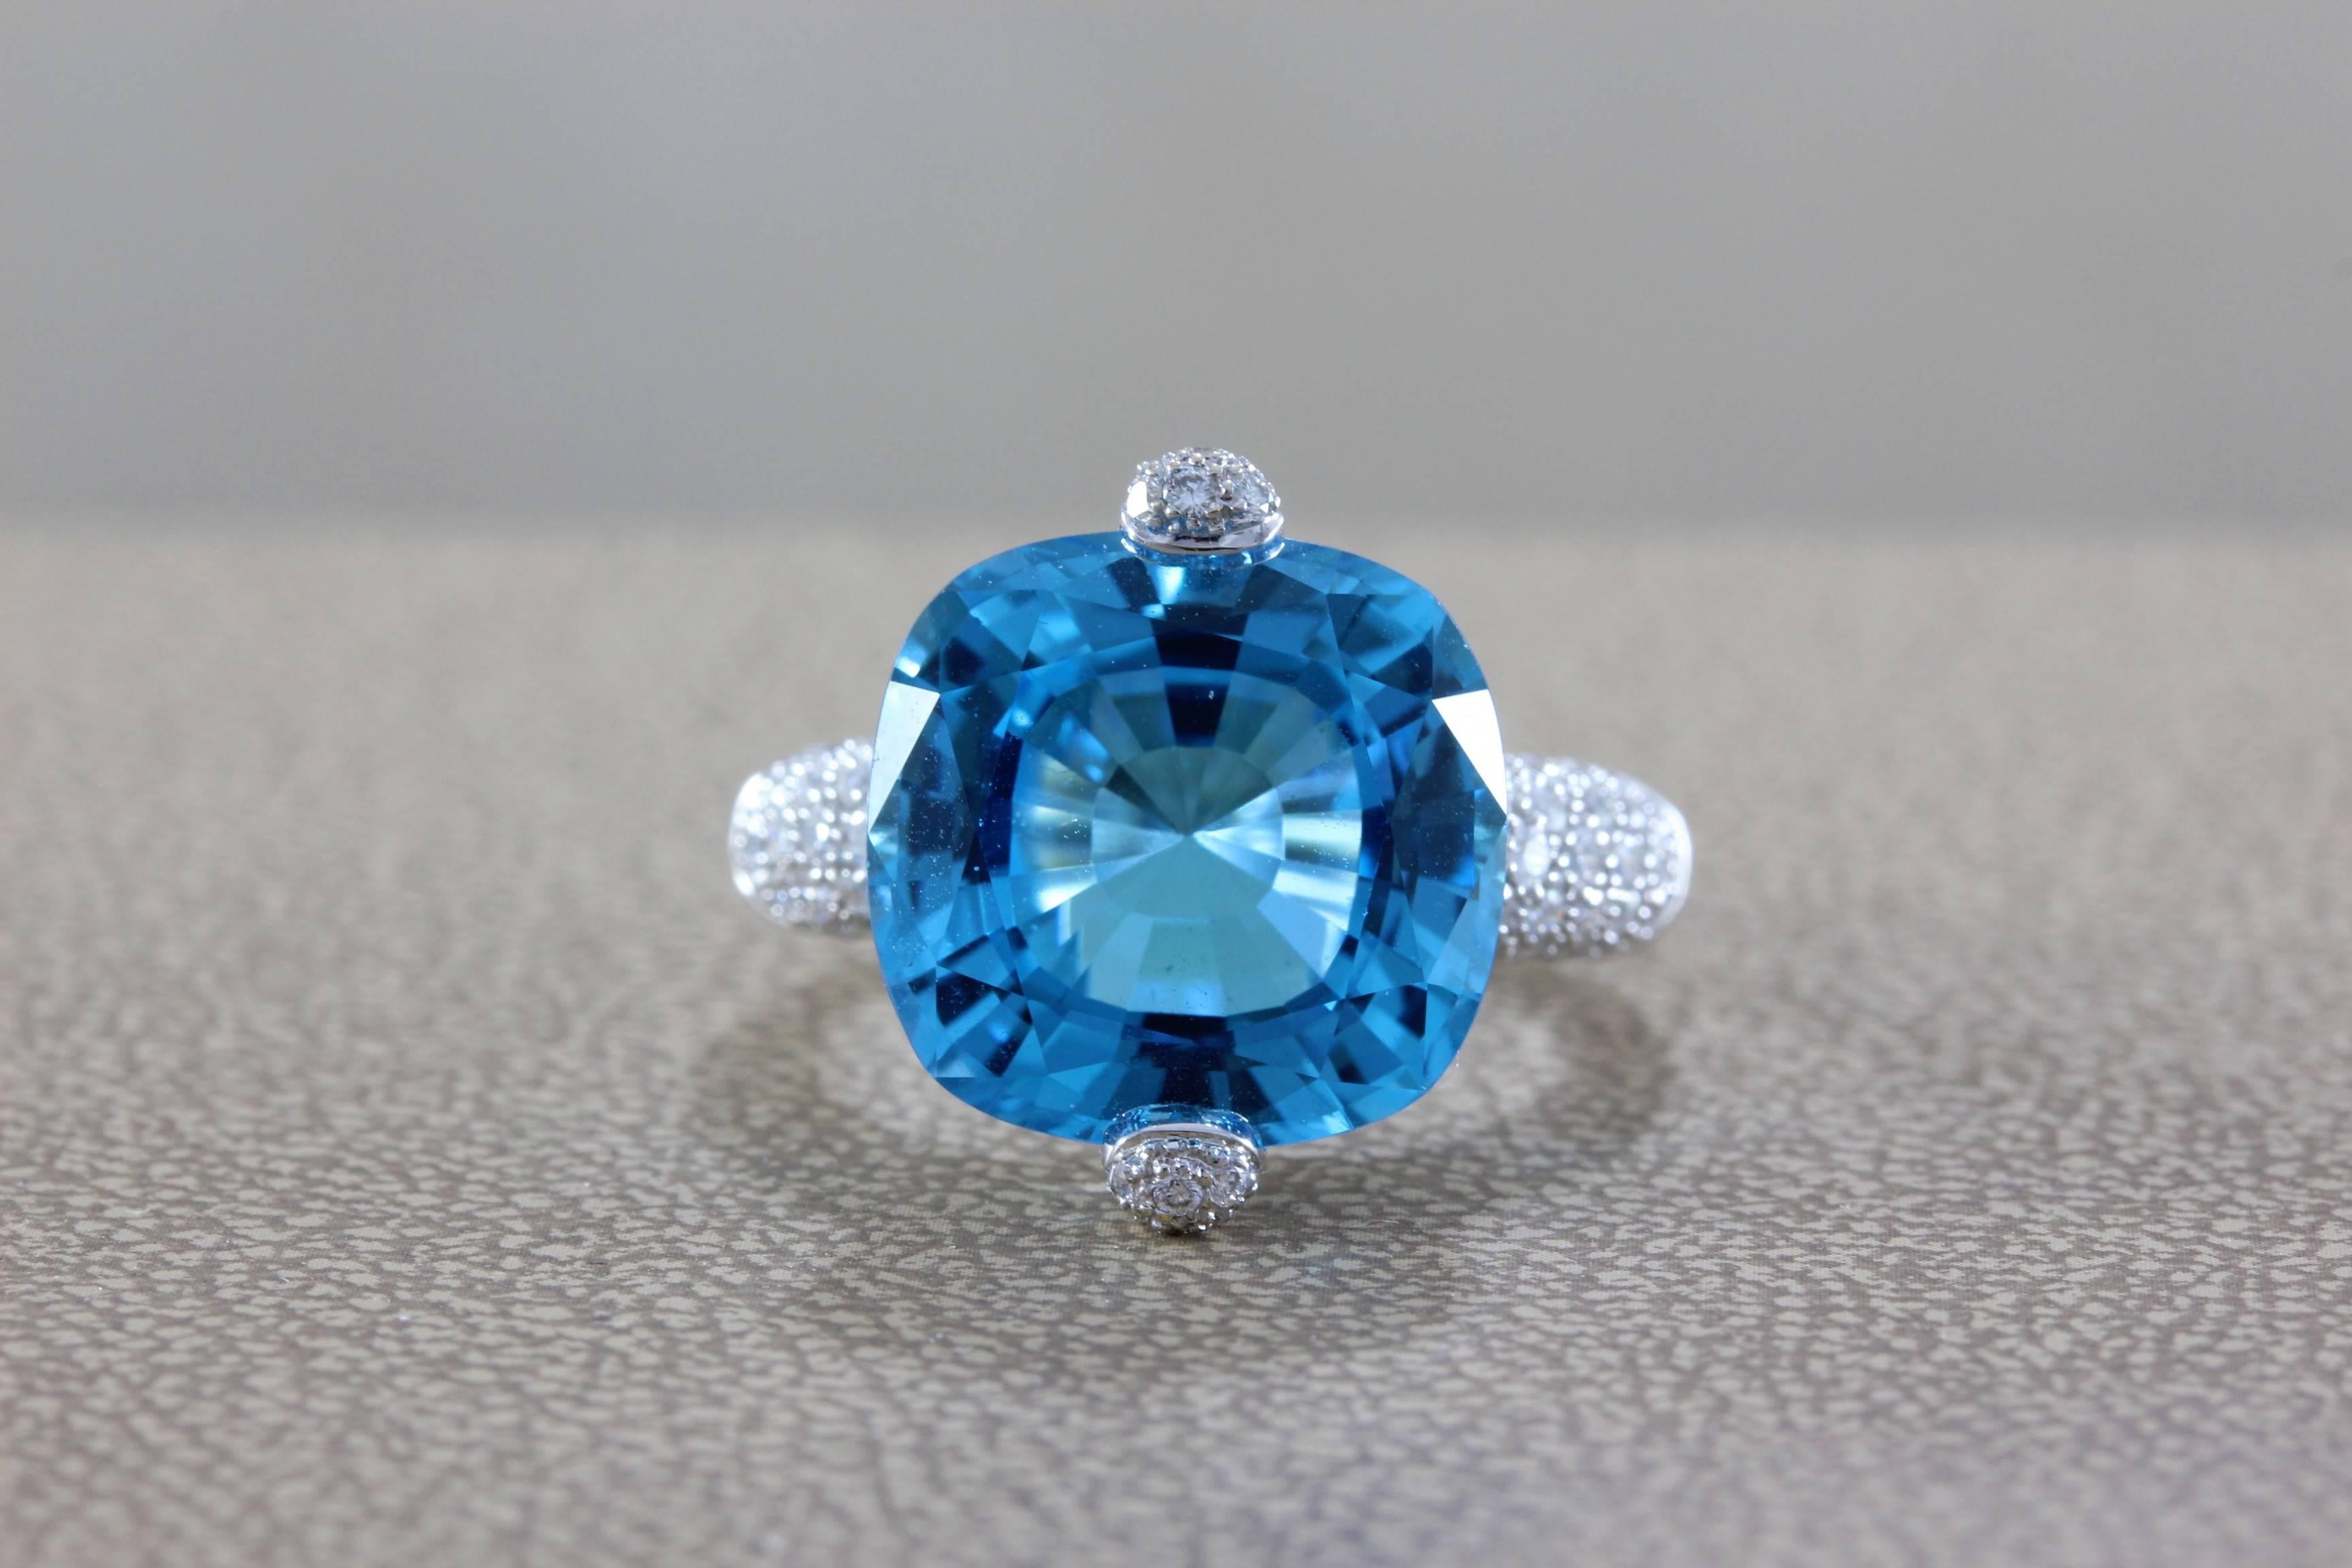 A vibrant 11.82 carat cushion cut blue topaz ring, uniquely set with two prongs.  The mounting features 0.94 carats of VS quality diamonds pave set in 18K white gold.  The craftsmanship and design of the ring is truly one of a kind.

Ring size 6 ½
